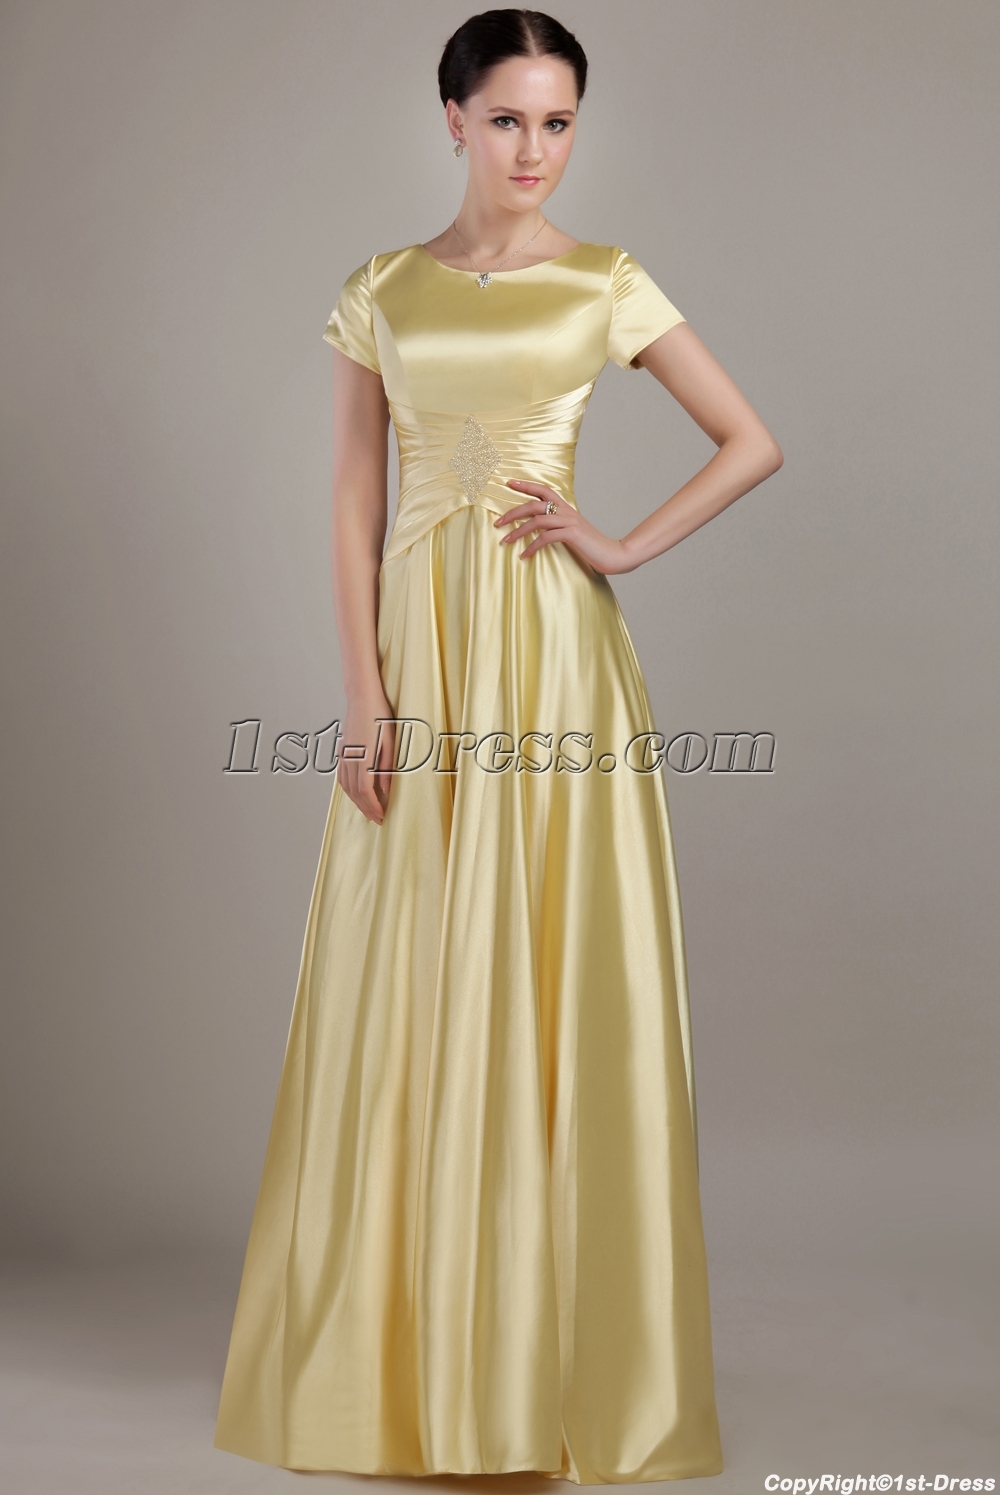 images/201304/big/Gold-Modest-Bridesmaid-Dress-with-Short-Sleeves-IMG_2998-1075-b-1-1366268314.jpg